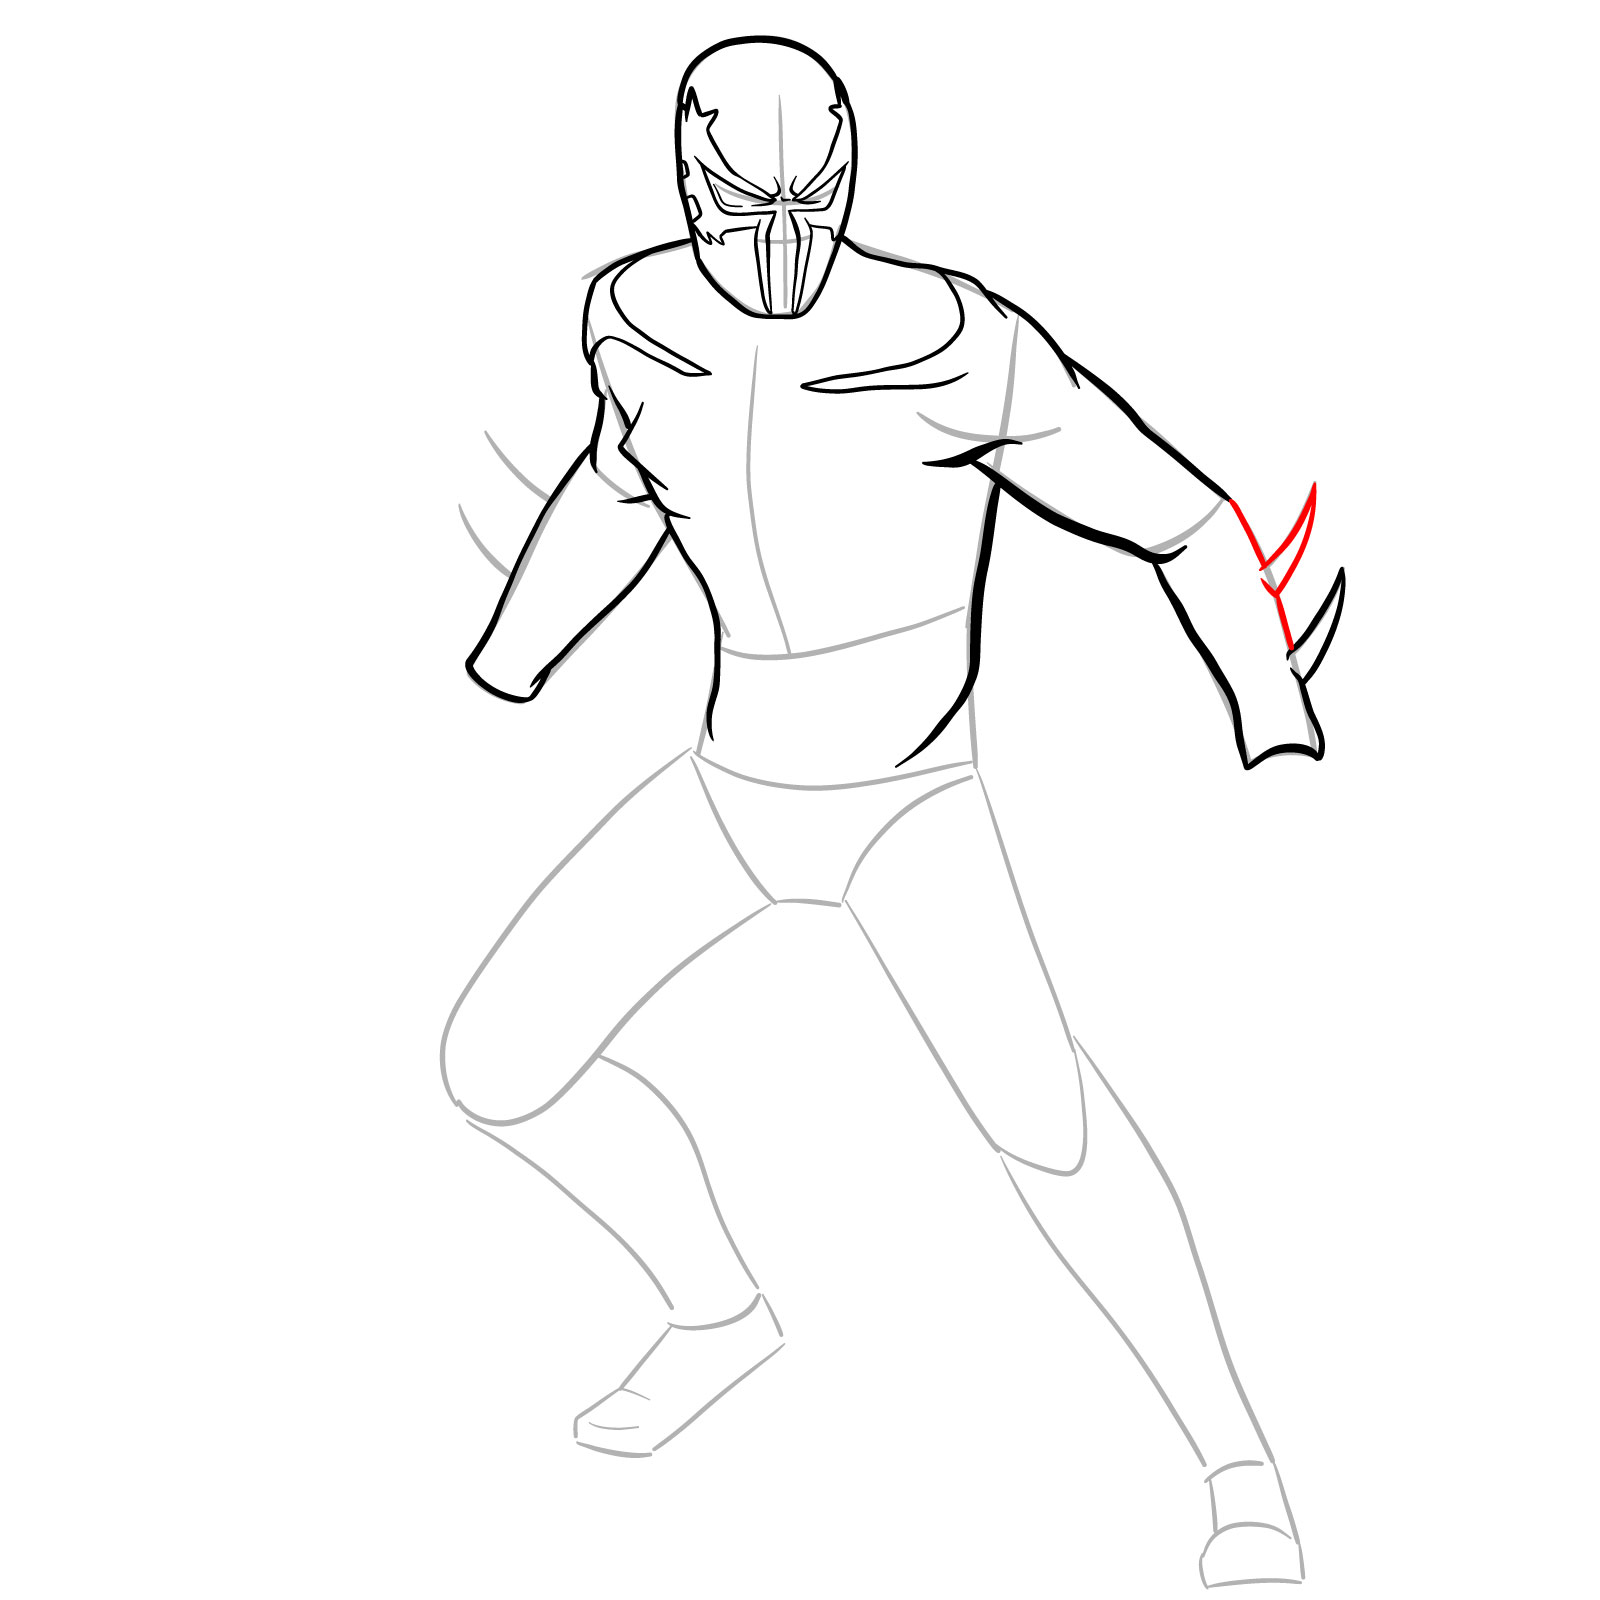 How to draw Spider-Man 2099 - step 17